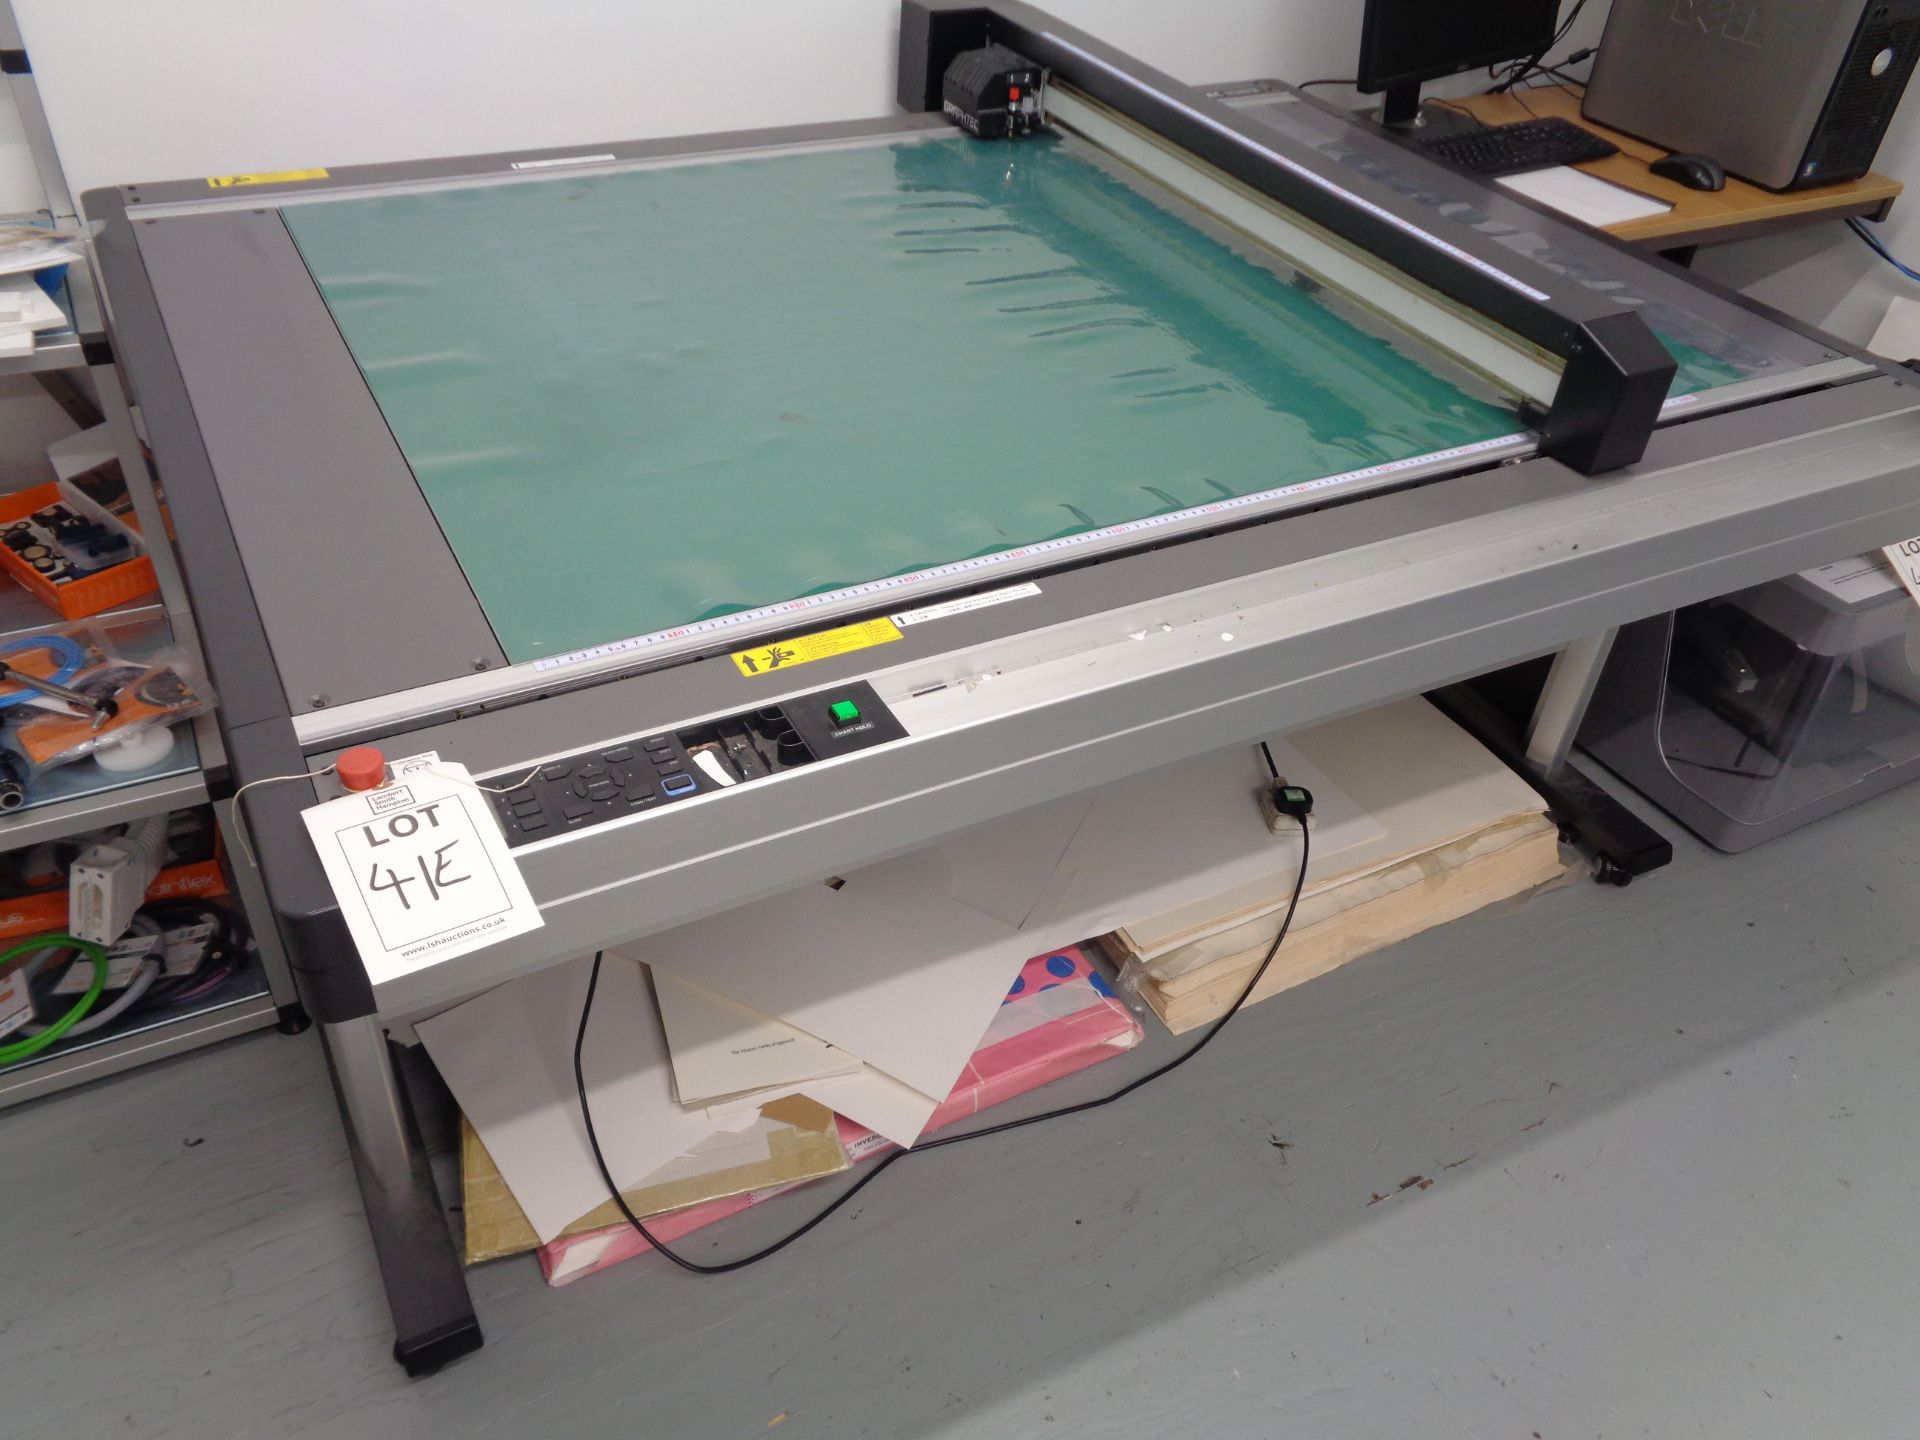 Graphtec Cutting Pro FCX-2000-120 computerised vinyl cutter serial no. A70410256 (2017)